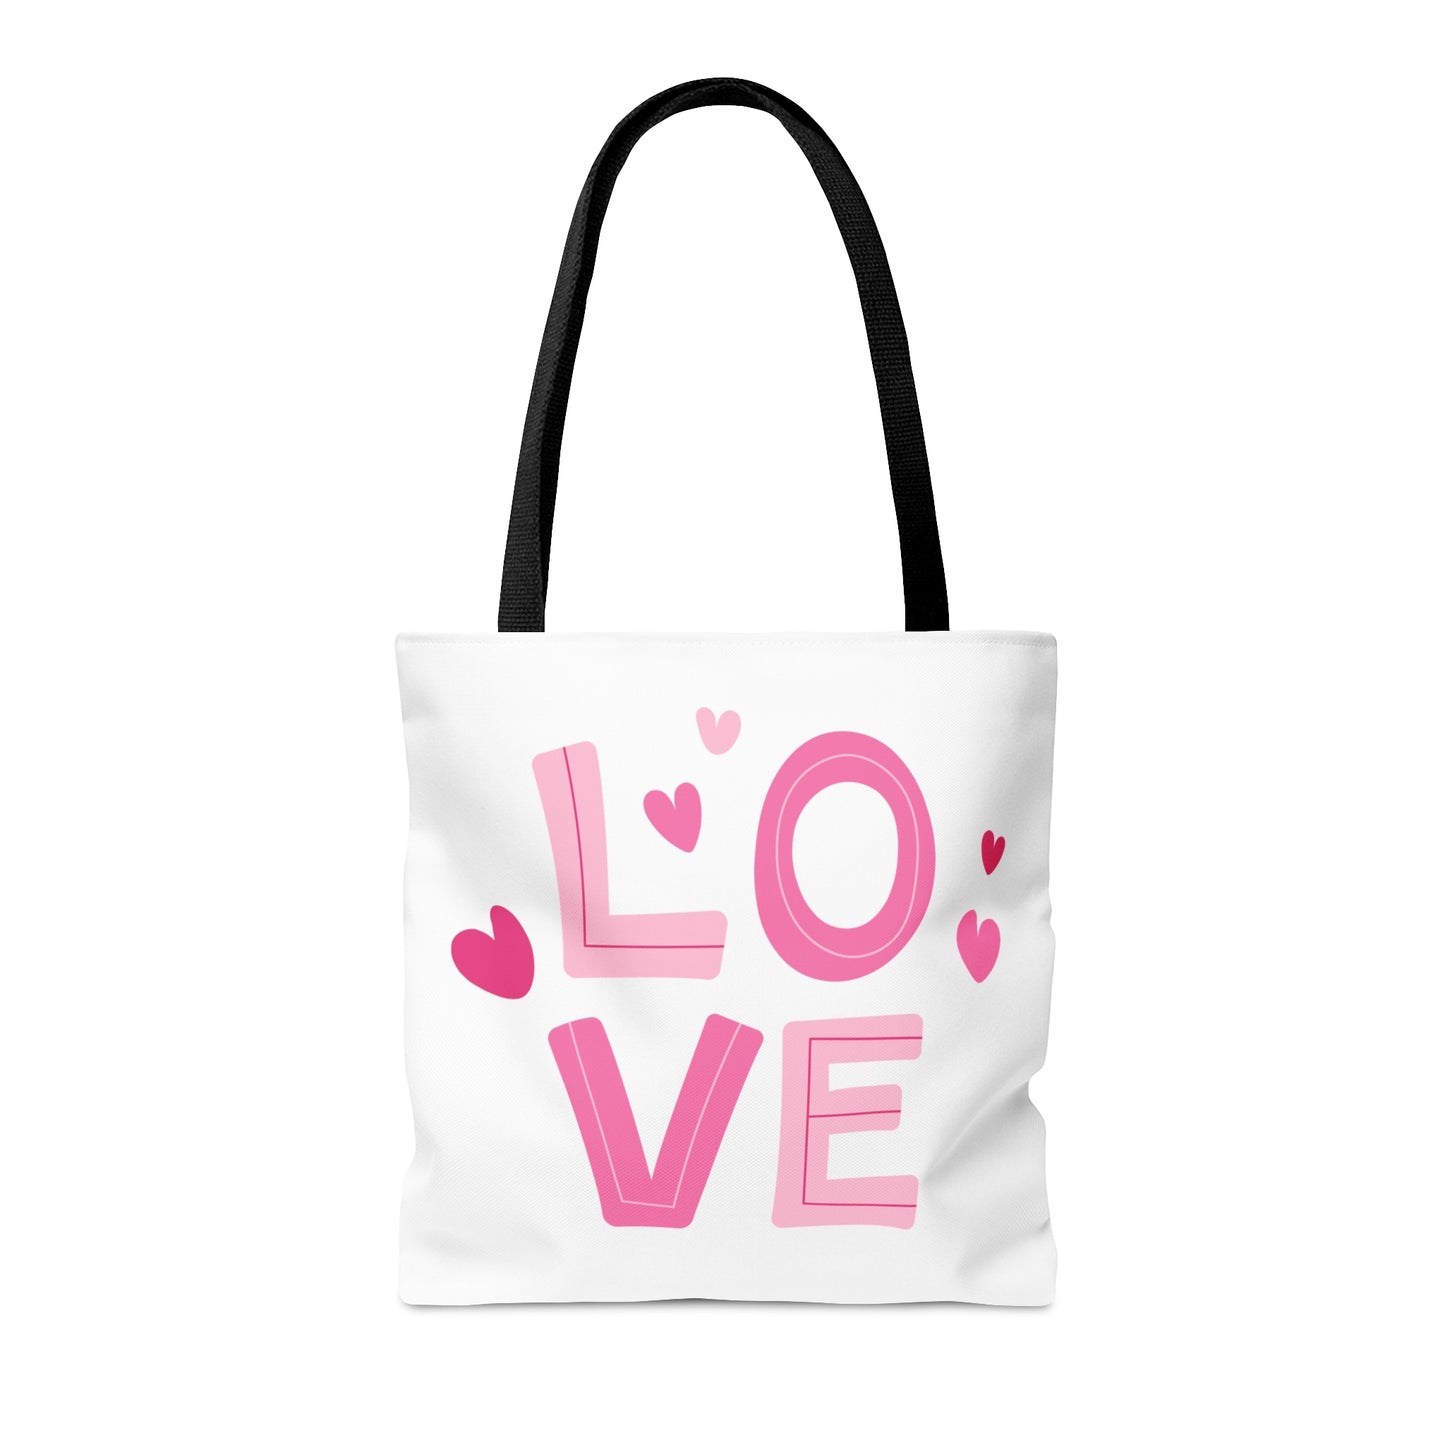 Love with Heart Printed Tote Bag, Valentine's Tote Bag, 3 Sizes